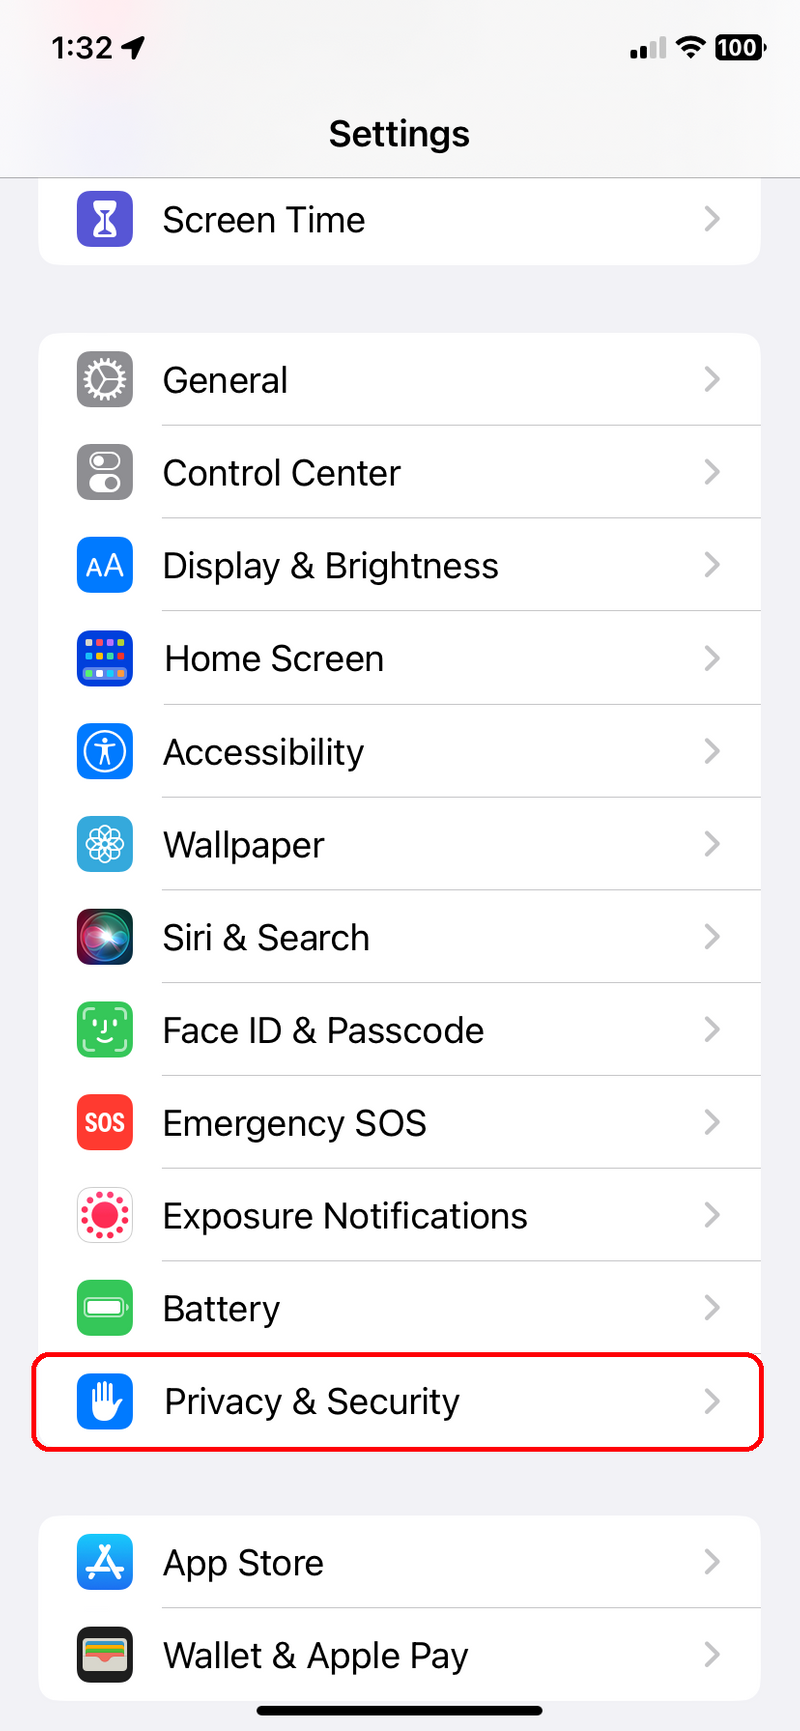 Settings menu with Privacy & Security highlighted.